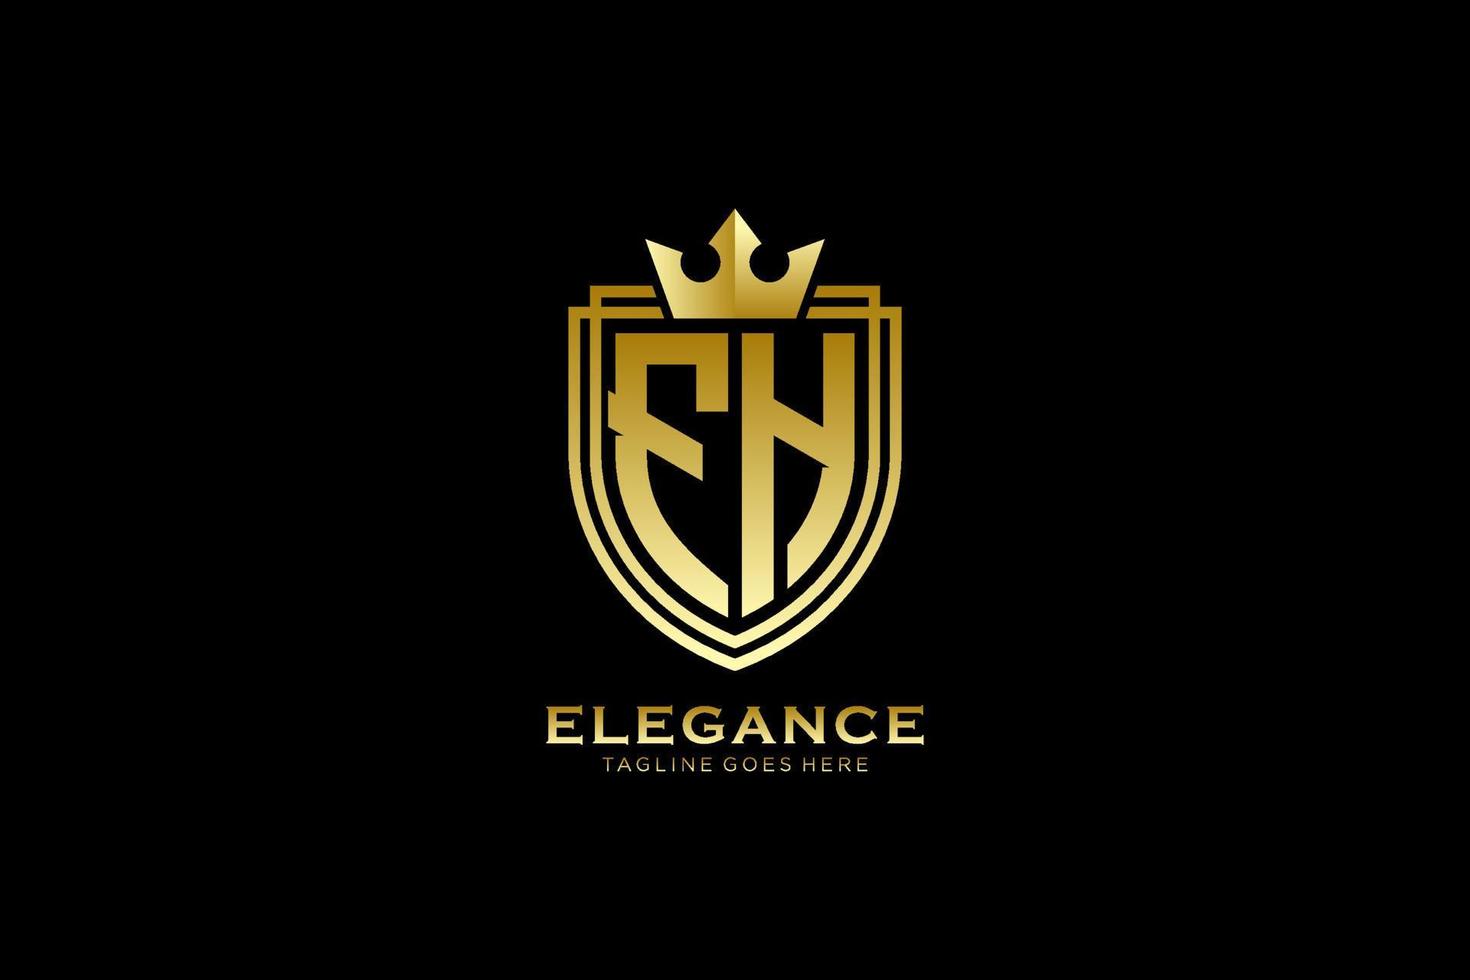 initial FH elegant luxury monogram logo or badge template with scrolls and royal crown - perfect for luxurious branding projects vector